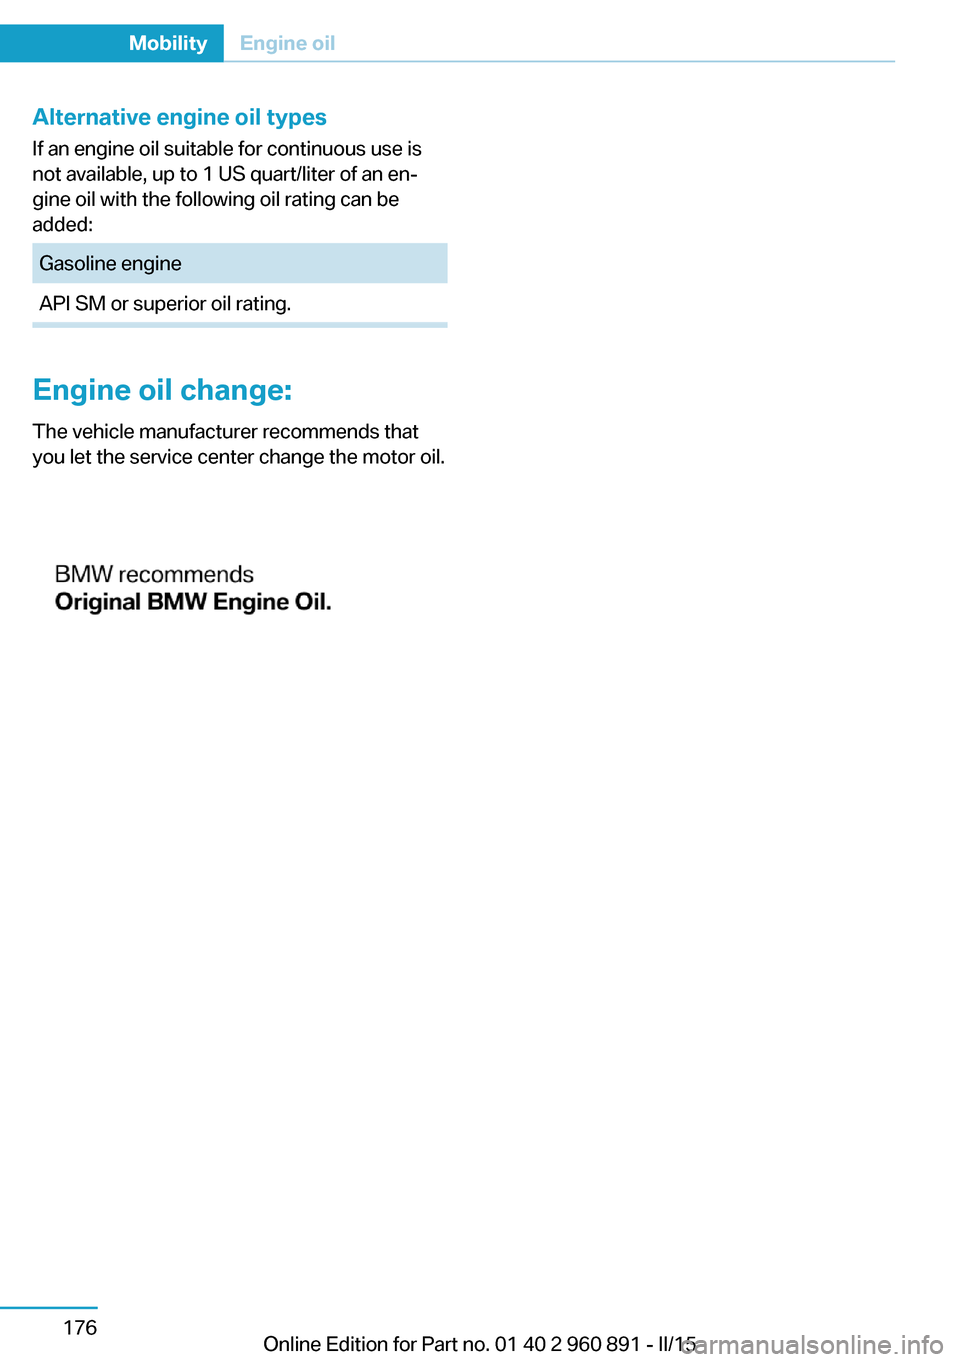 BMW I8 2015 I12 Service Manual Alternative engine oil typesIf an engine oil suitable for continuous use is
not available, up to 1 US quart/liter of an en‐
gine oil with the following oil rating can be
added:Gasoline engineAPI SM 